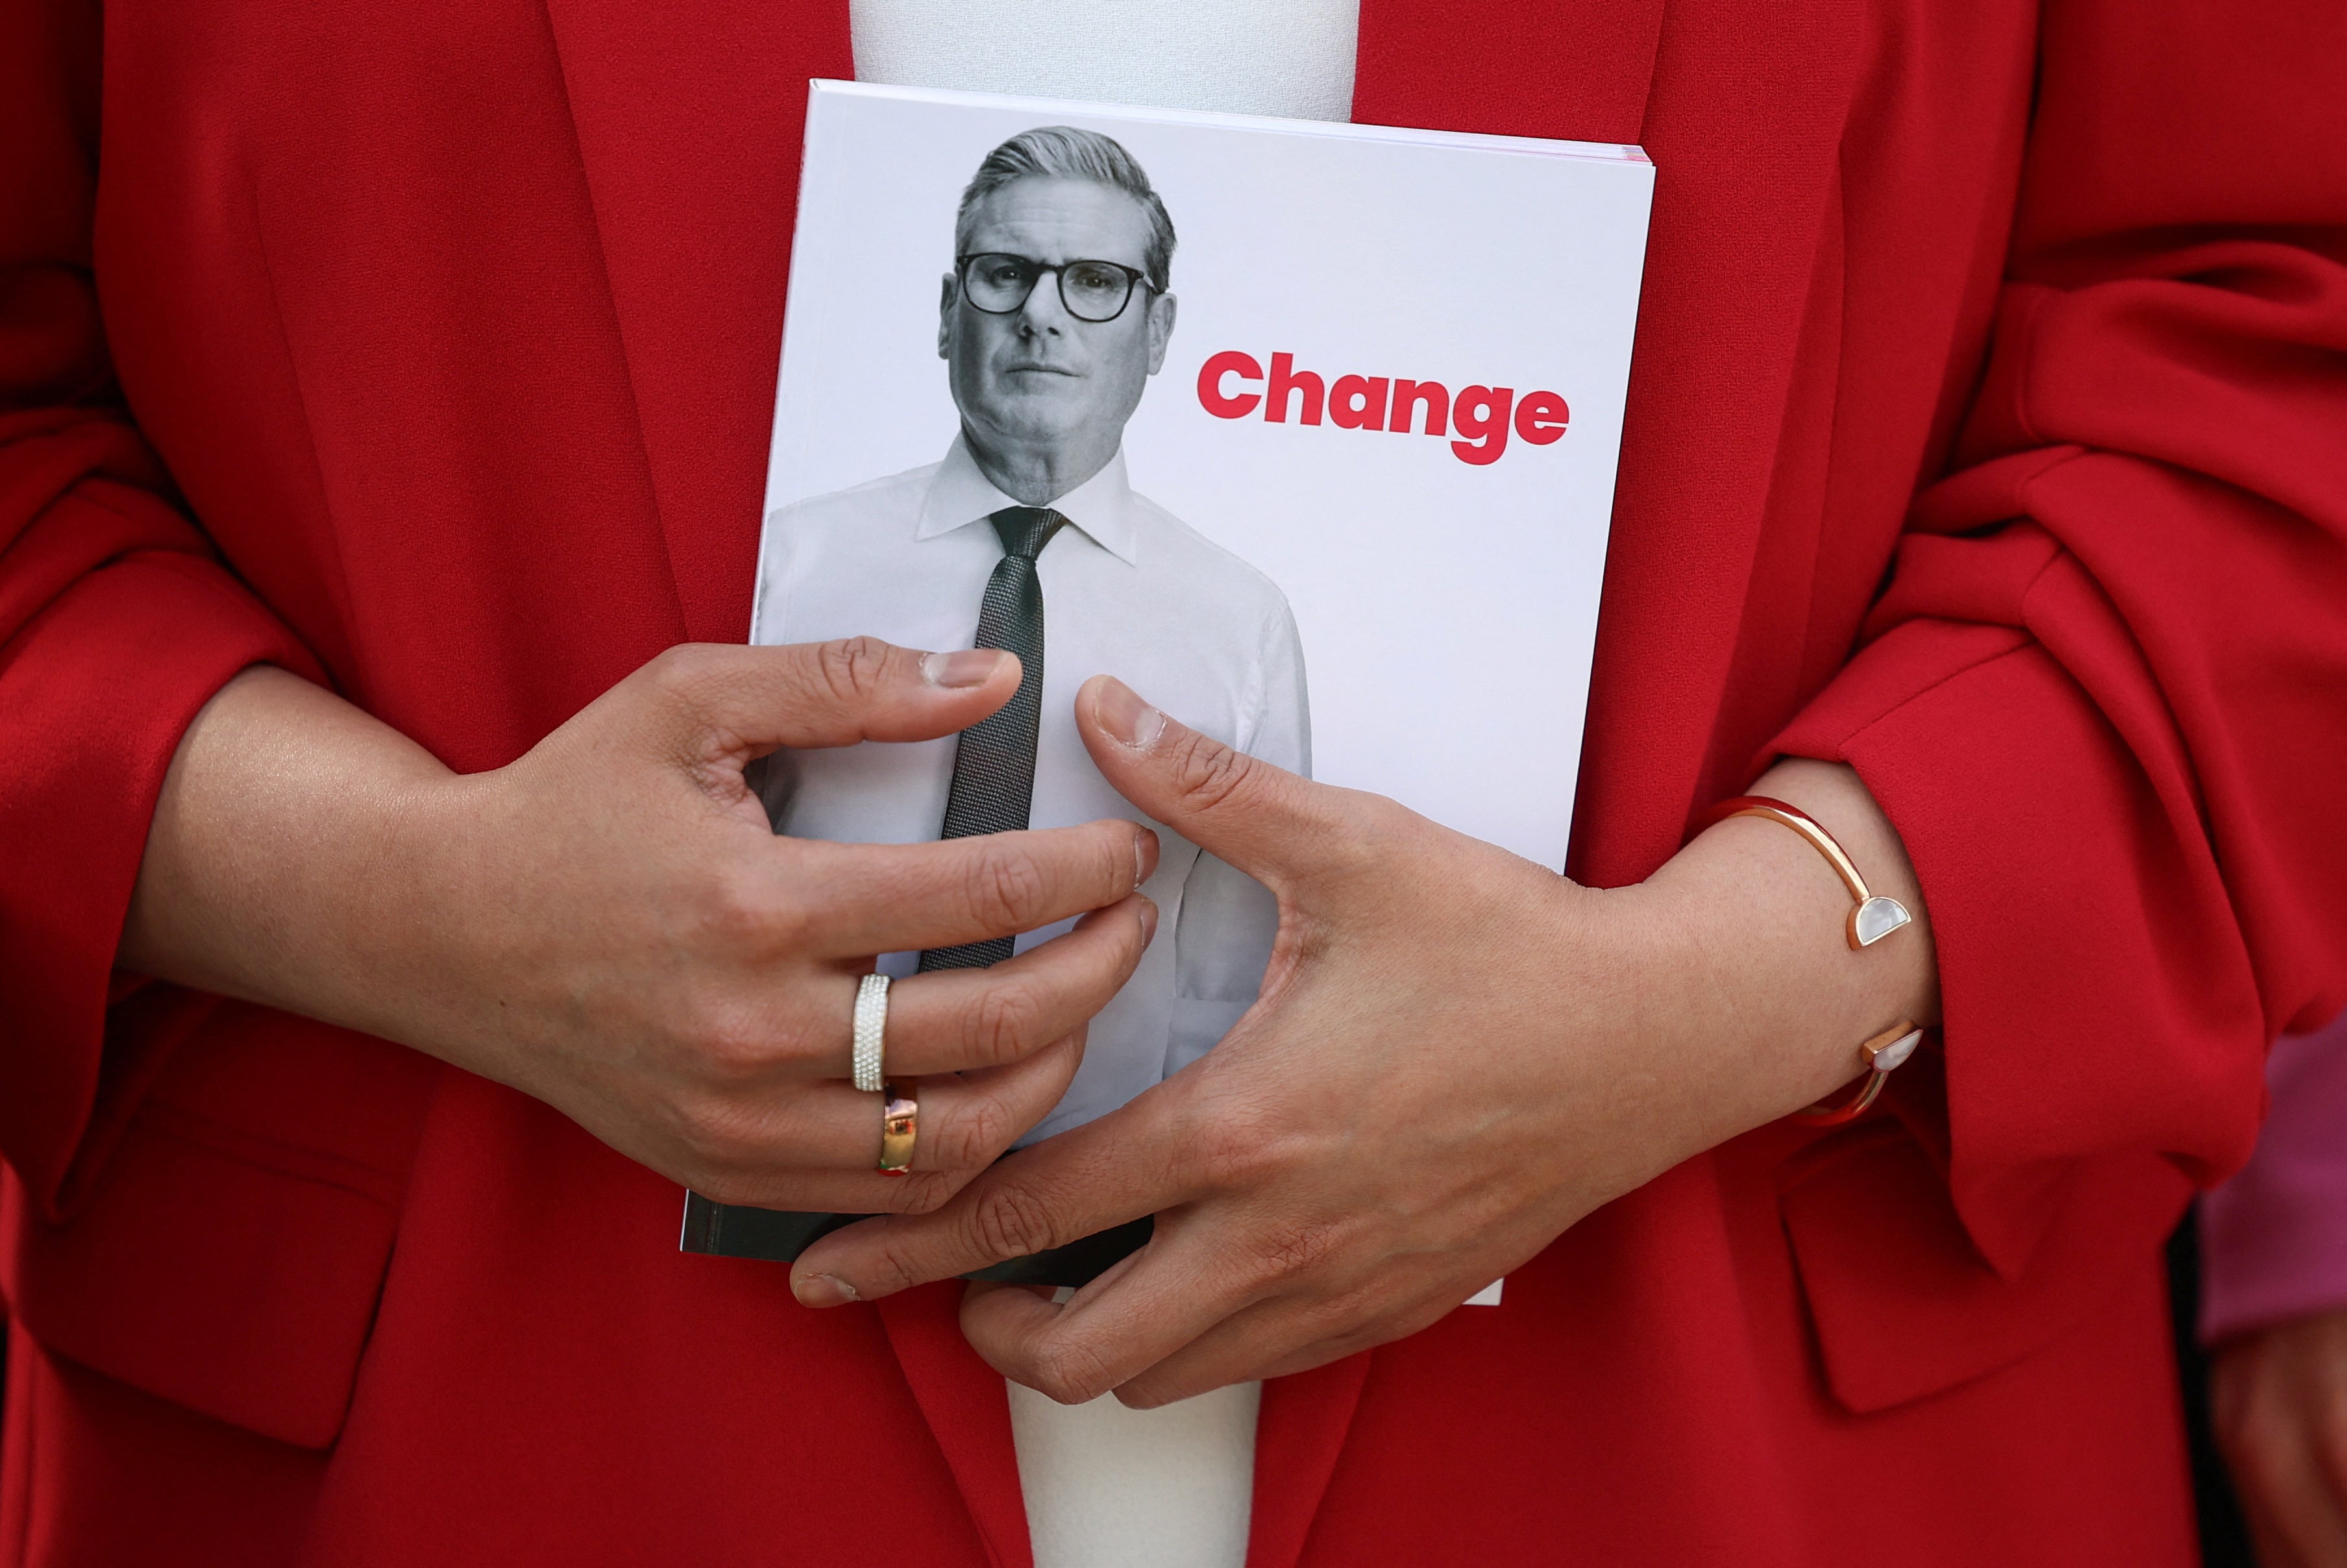 The Forde report, released in 2022, made 165 recommendations for change within the Labour Party